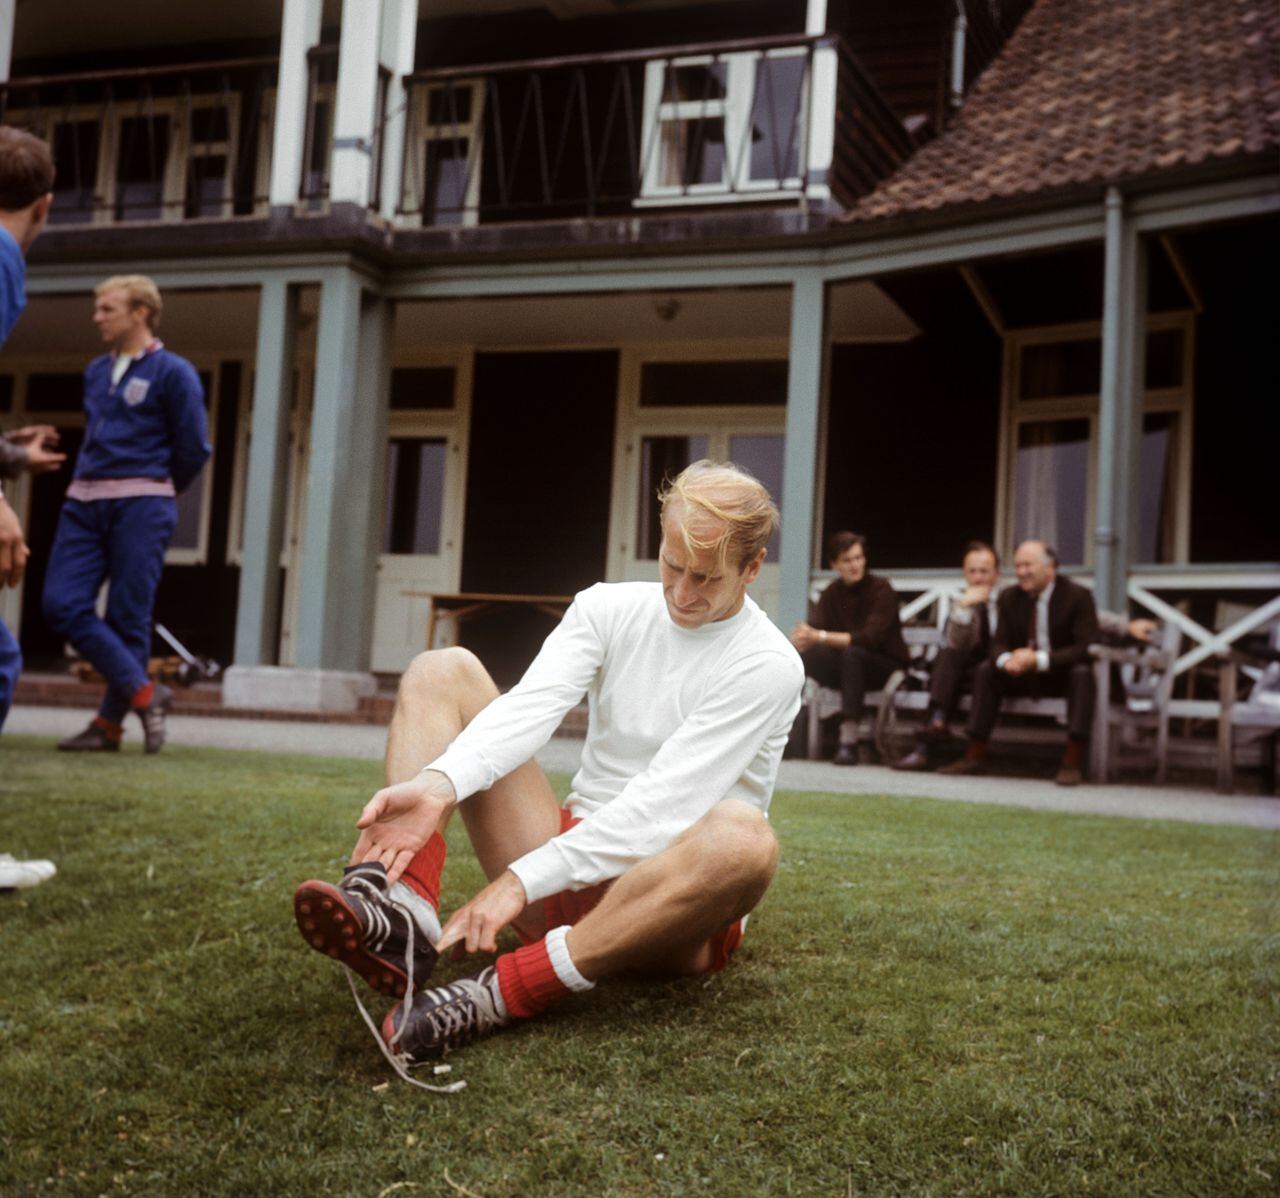 England's Bobby Charlton preparing for a World Cup training session at Roehampton, London   (Photo by PA Images via Getty Images)